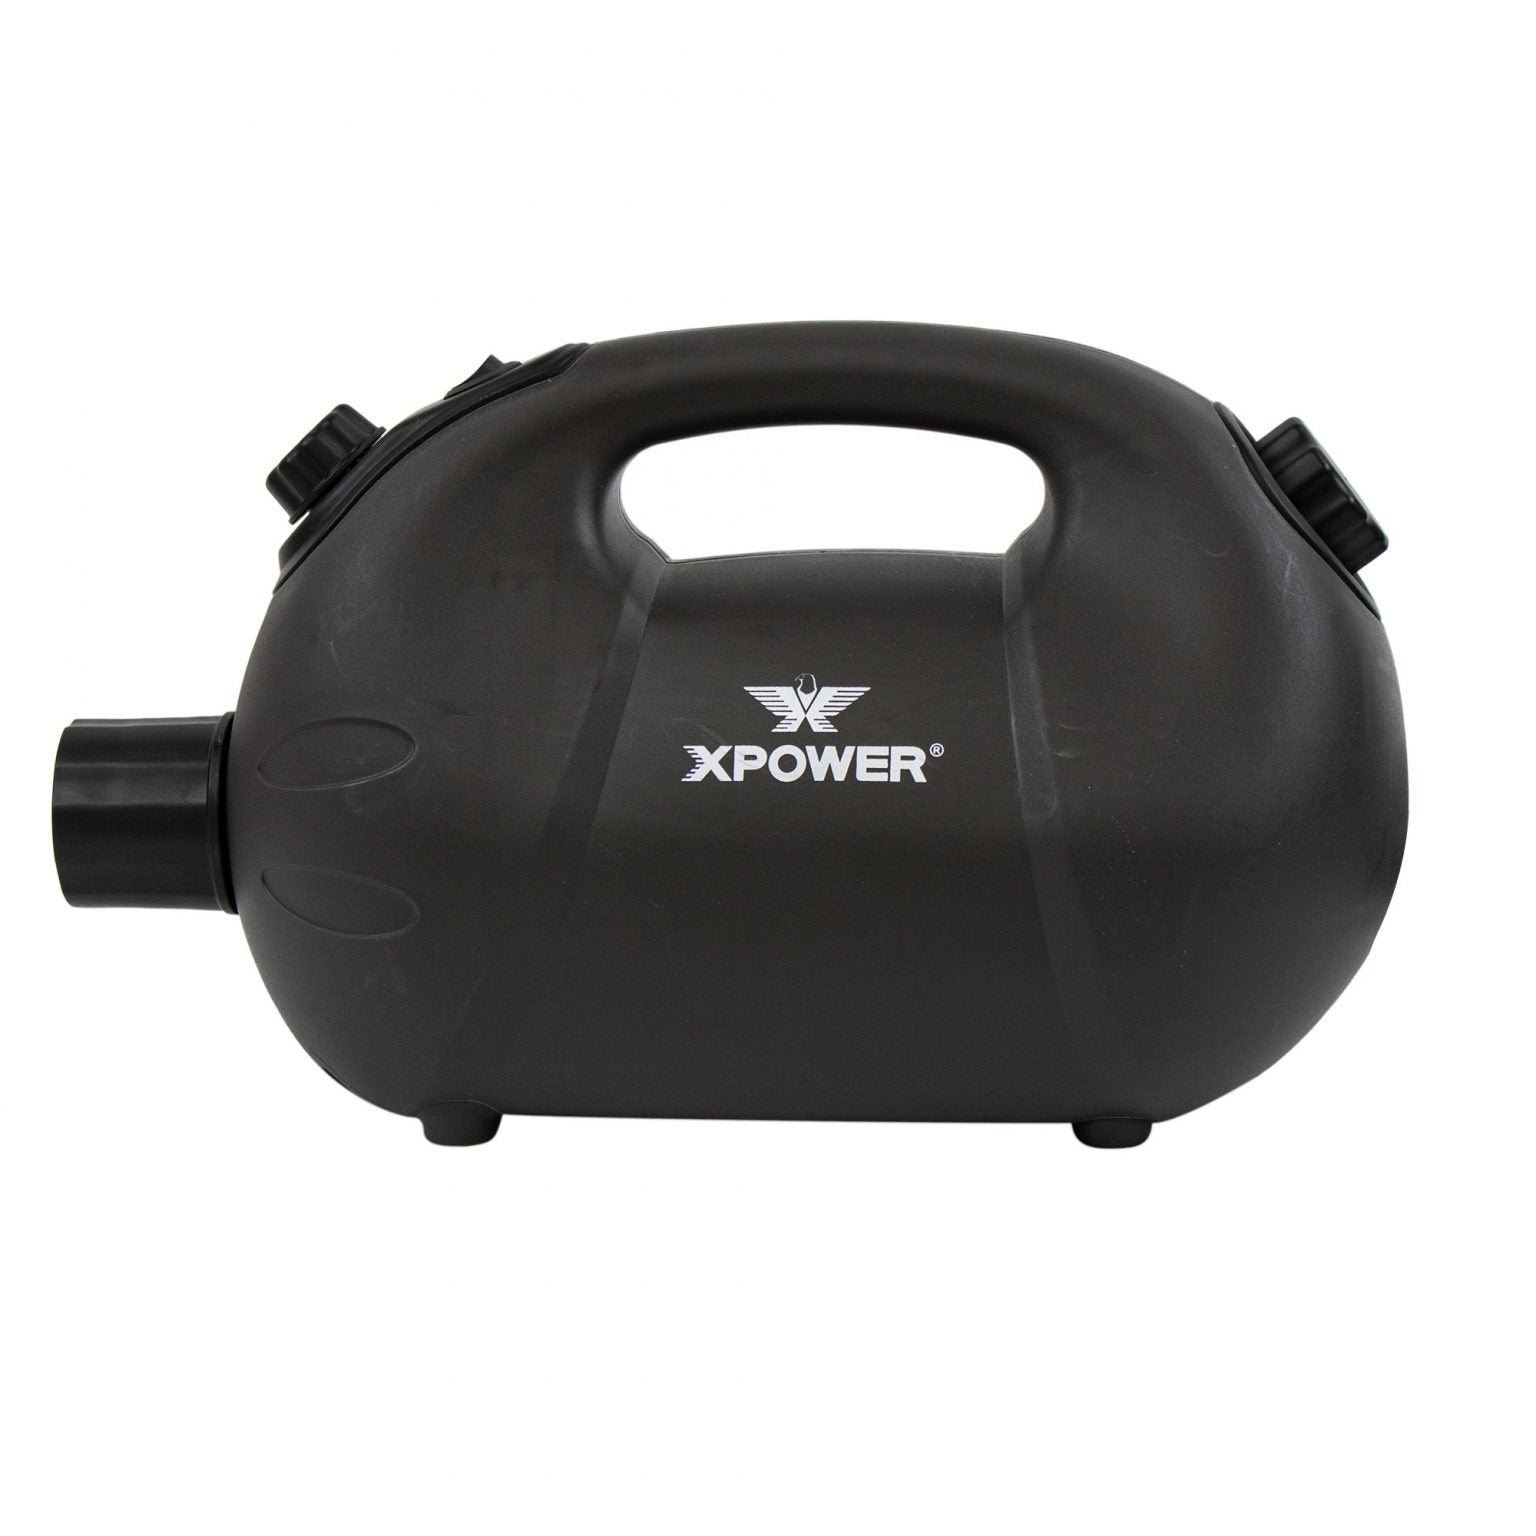 XPOWER F-16B ULV Battery Operated Cold Fogger - 1200 ml Capacity - 200 ml/min Flow Rate